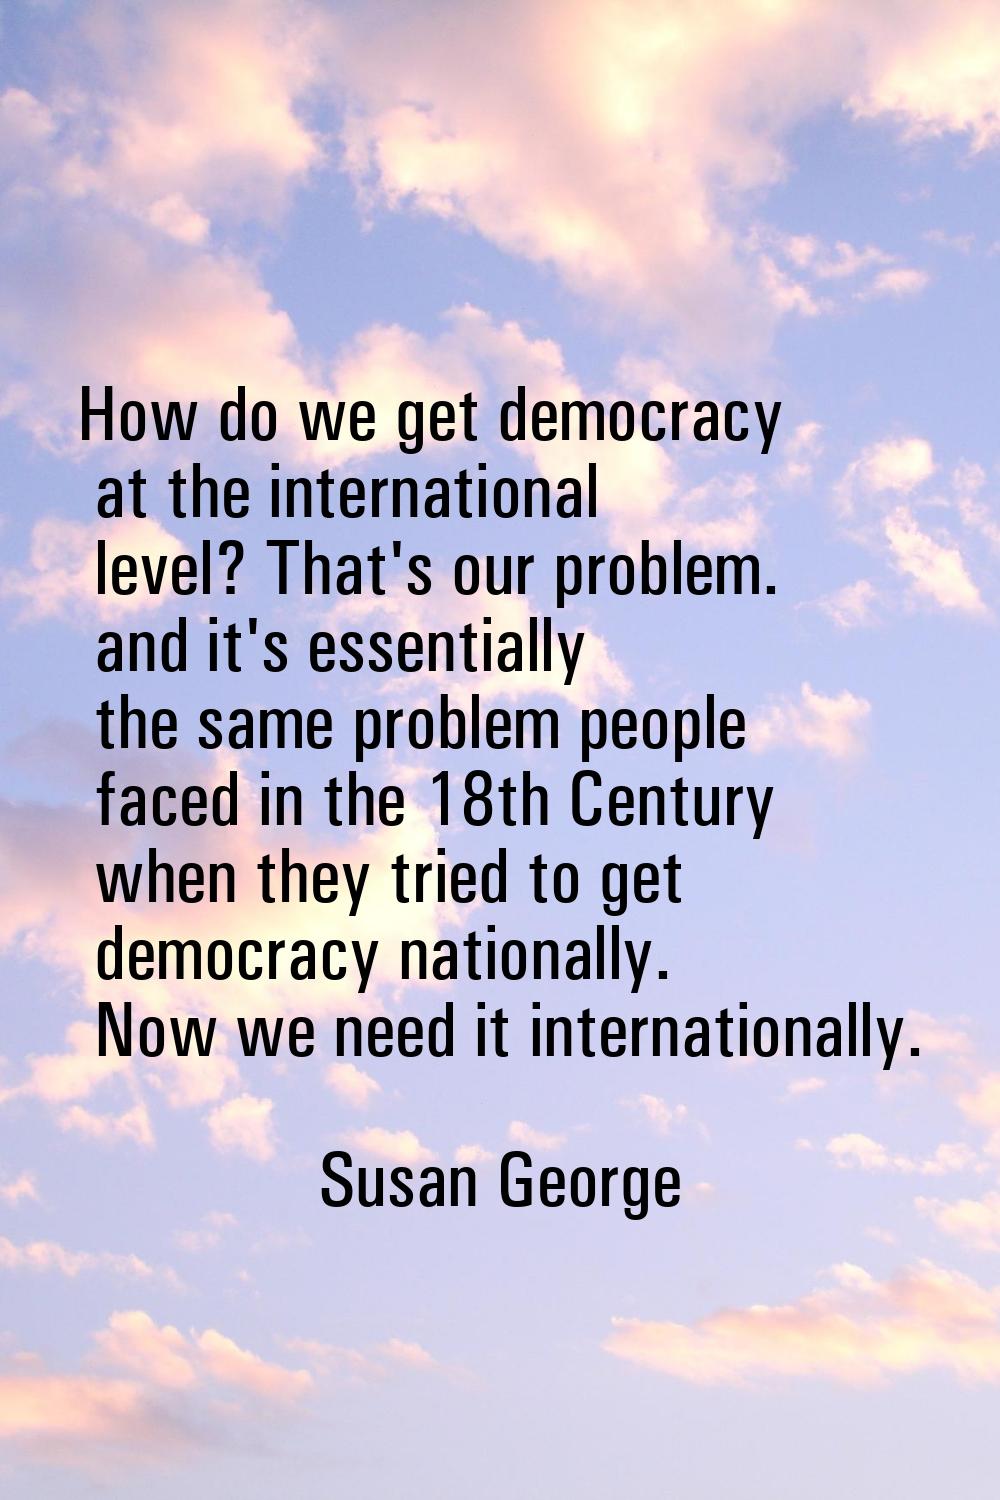 How do we get democracy at the international level? That's our problem. and it's essentially the sa